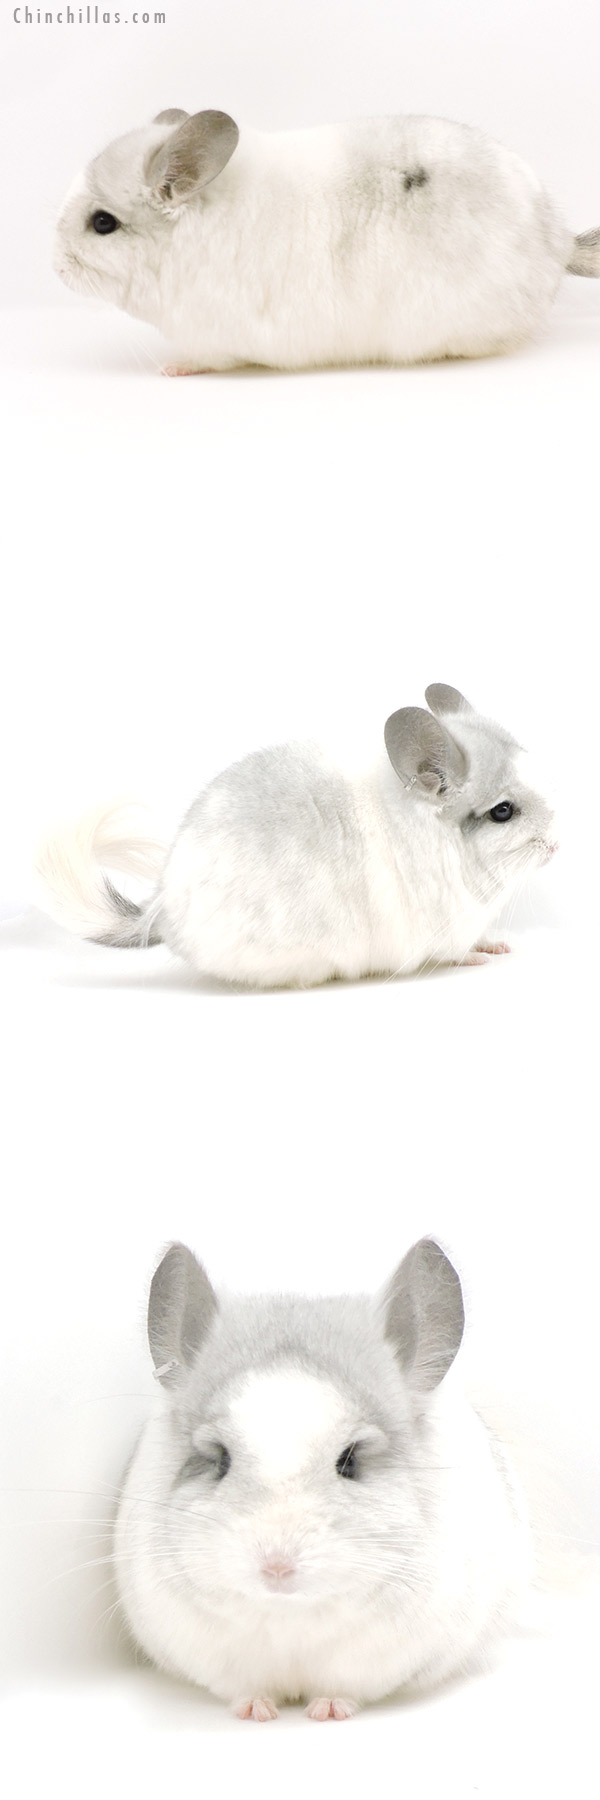 Chinchilla or related item offered for sale or export on Chinchillas.com - 19317 Exceptional White Mosaic  Royal Persian Angora Male Chinchilla